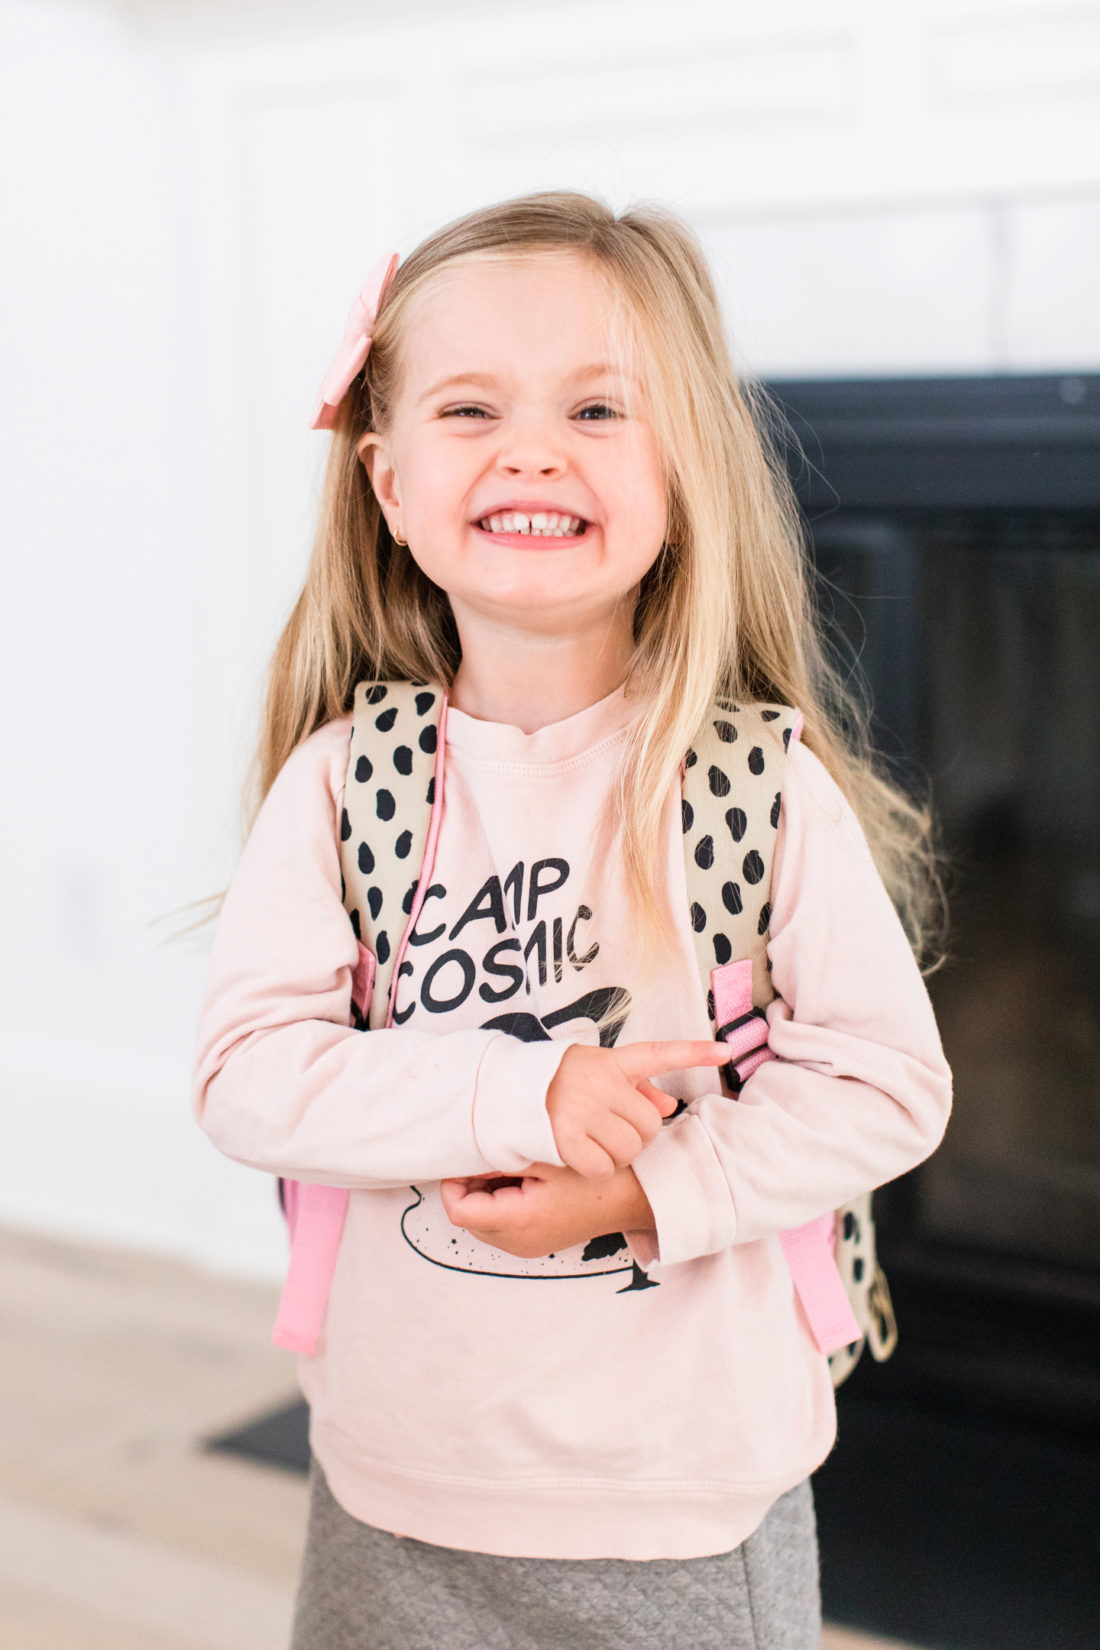 Marlowe Martino wears a pink sweatshirt and smiles as she gets ready for her first day of school